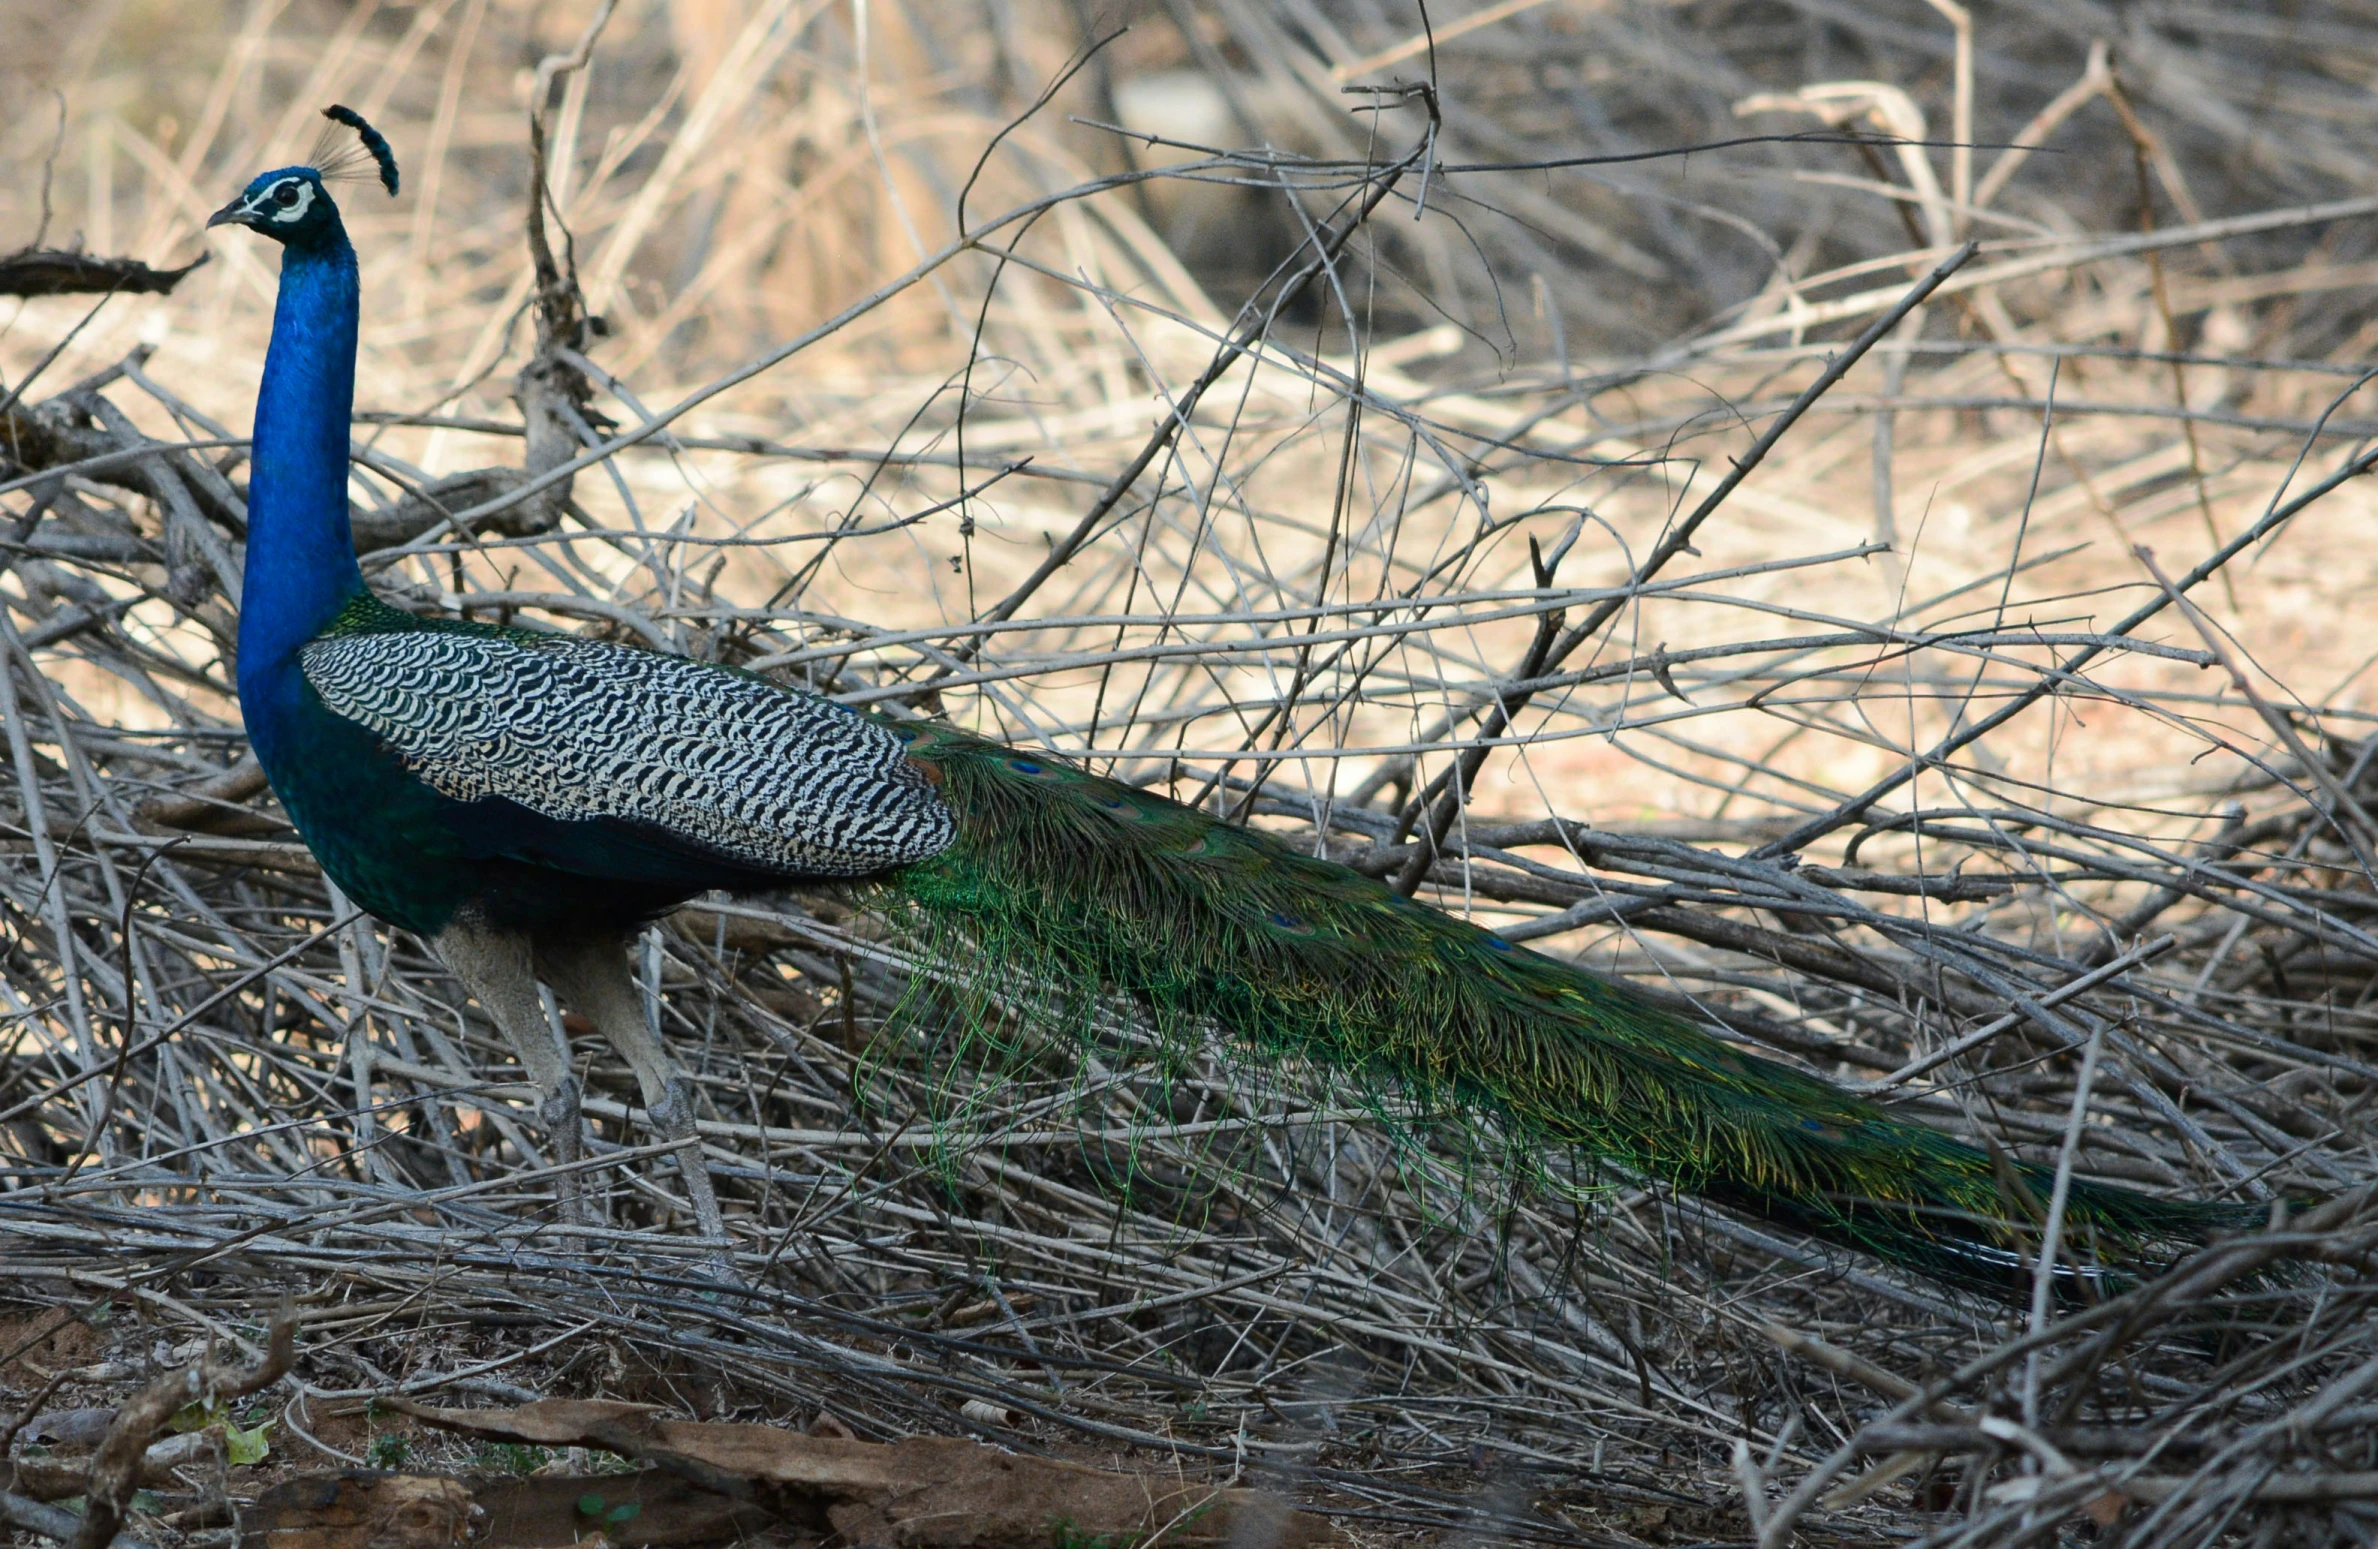 a blue peacock standing on a dry ground